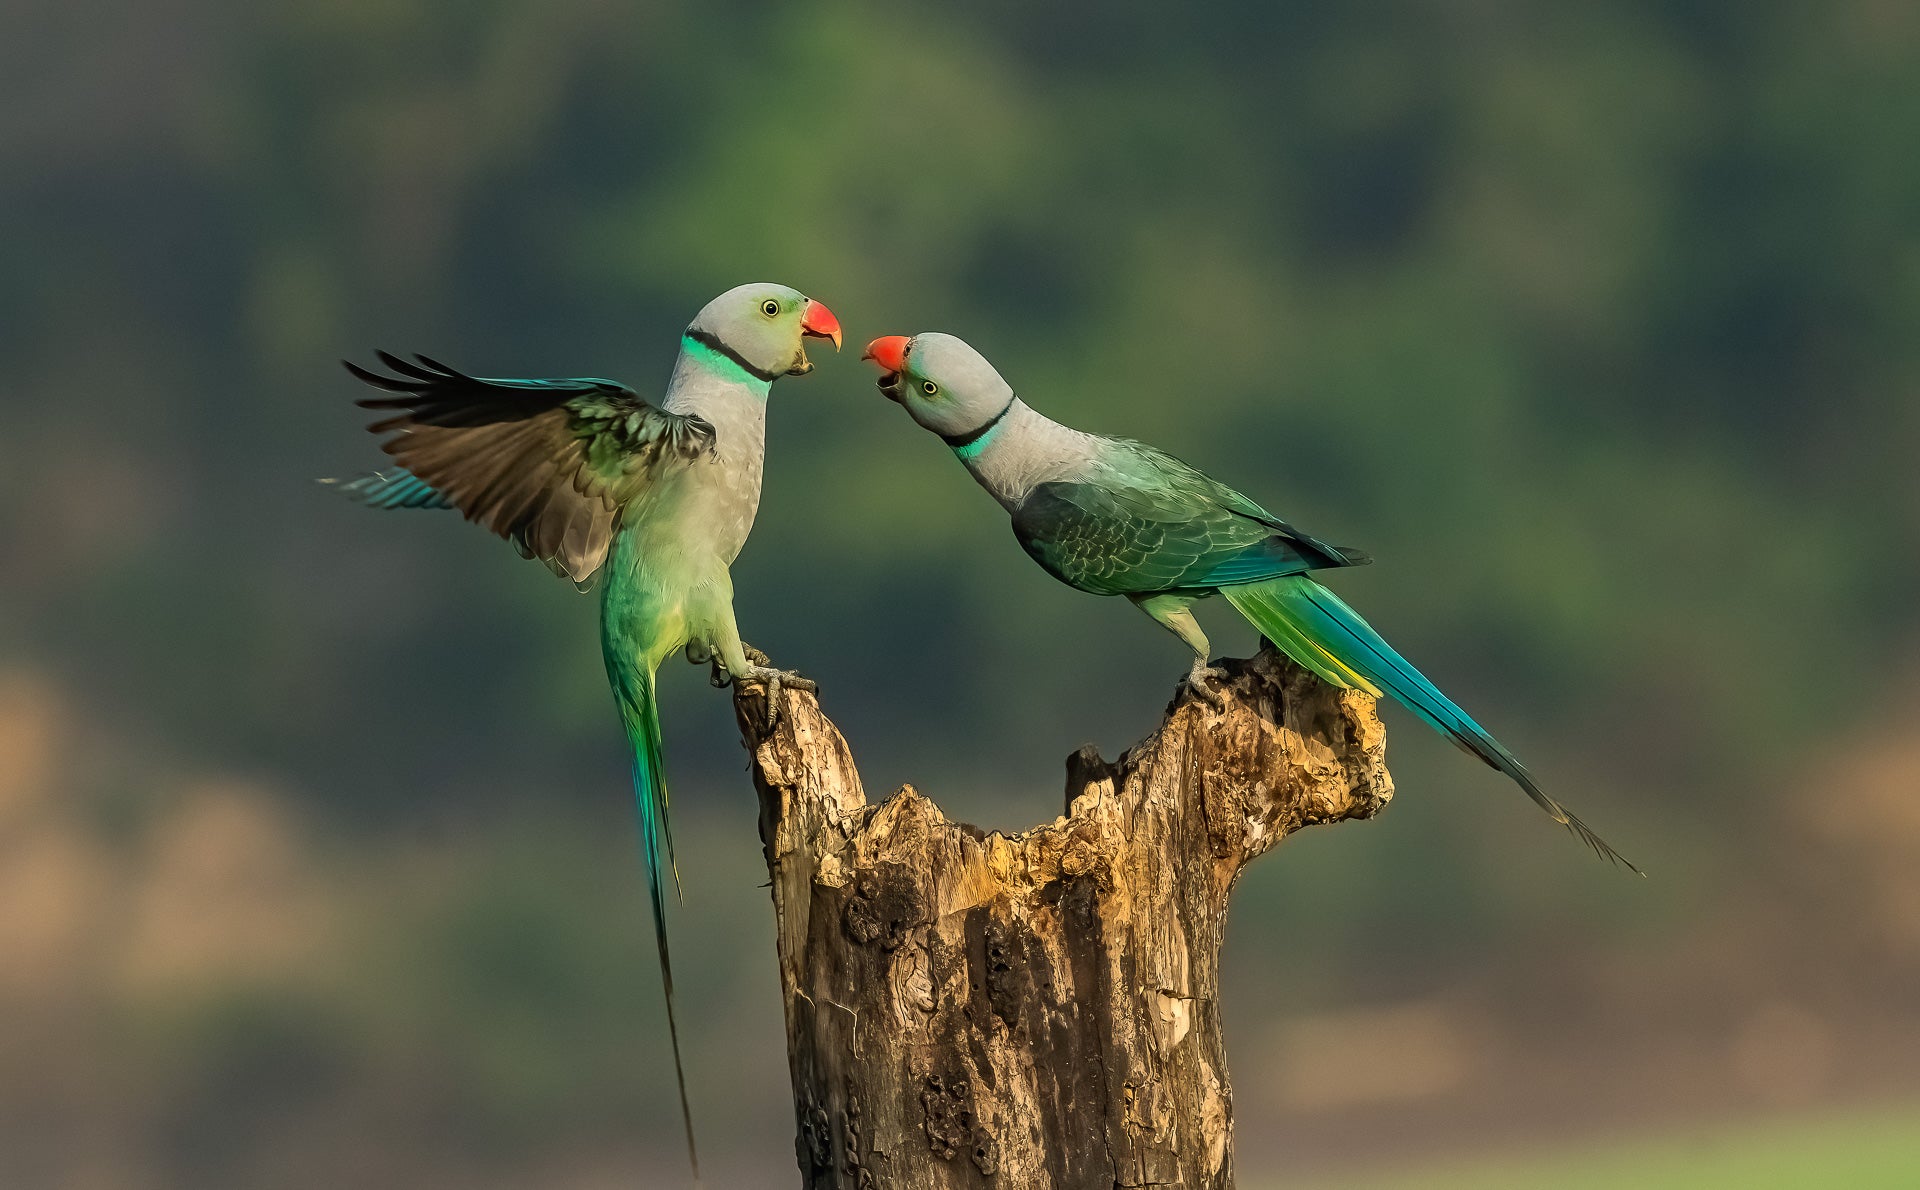 nature ttl photographer of the year two parakeets fight over food